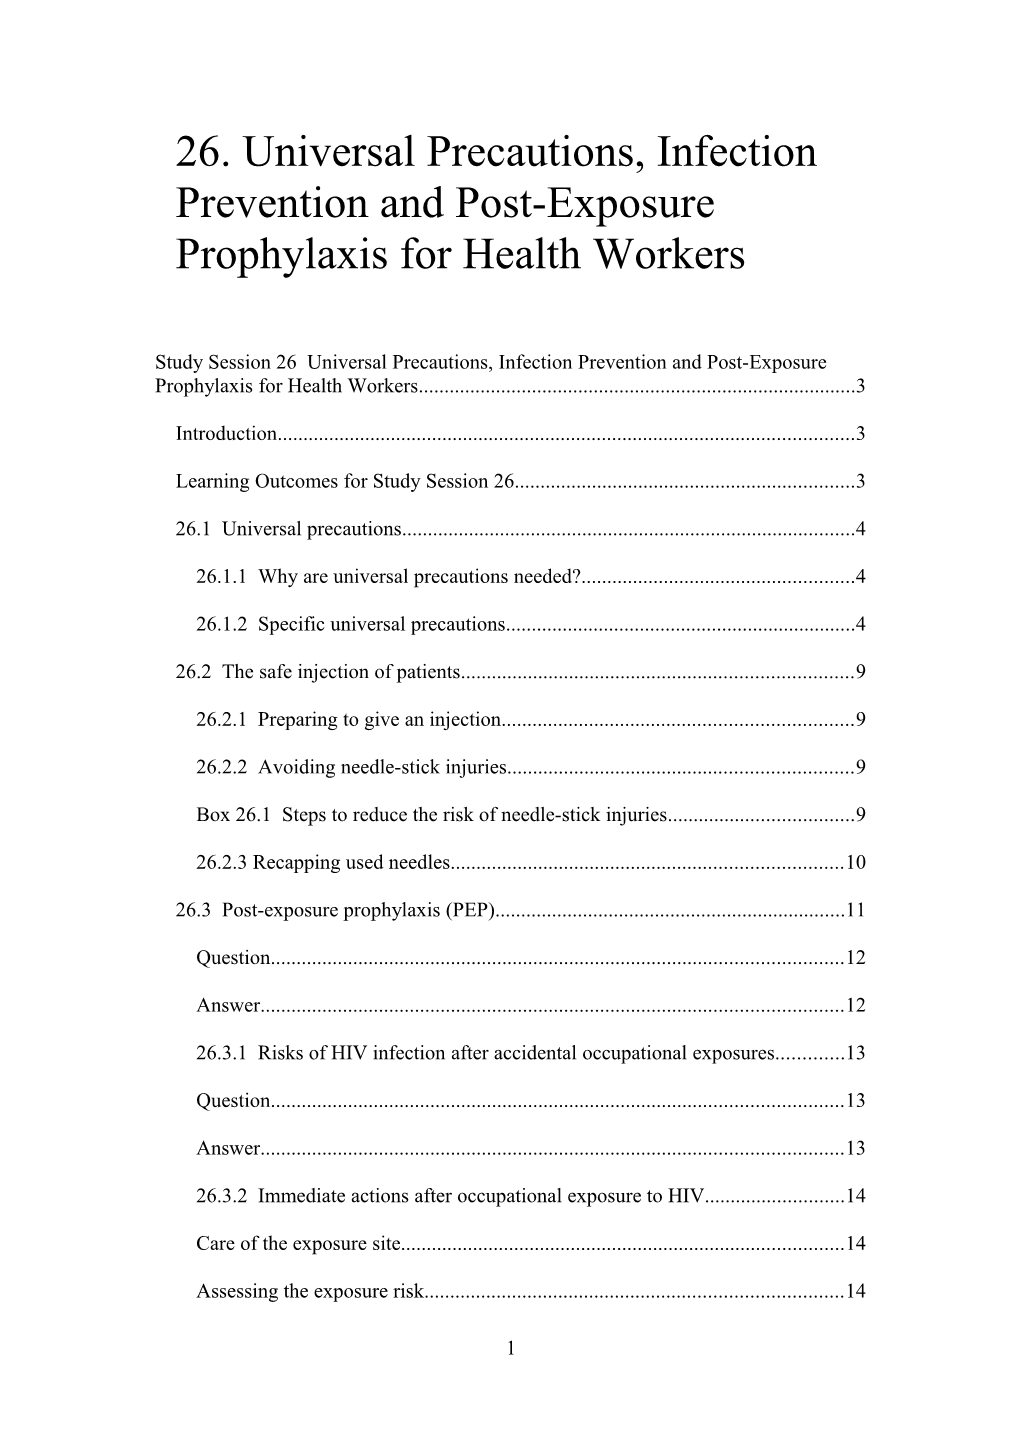 26. Universal Precautions, Infection Prevention and Post-Exposure Prophylaxis for Health Workers